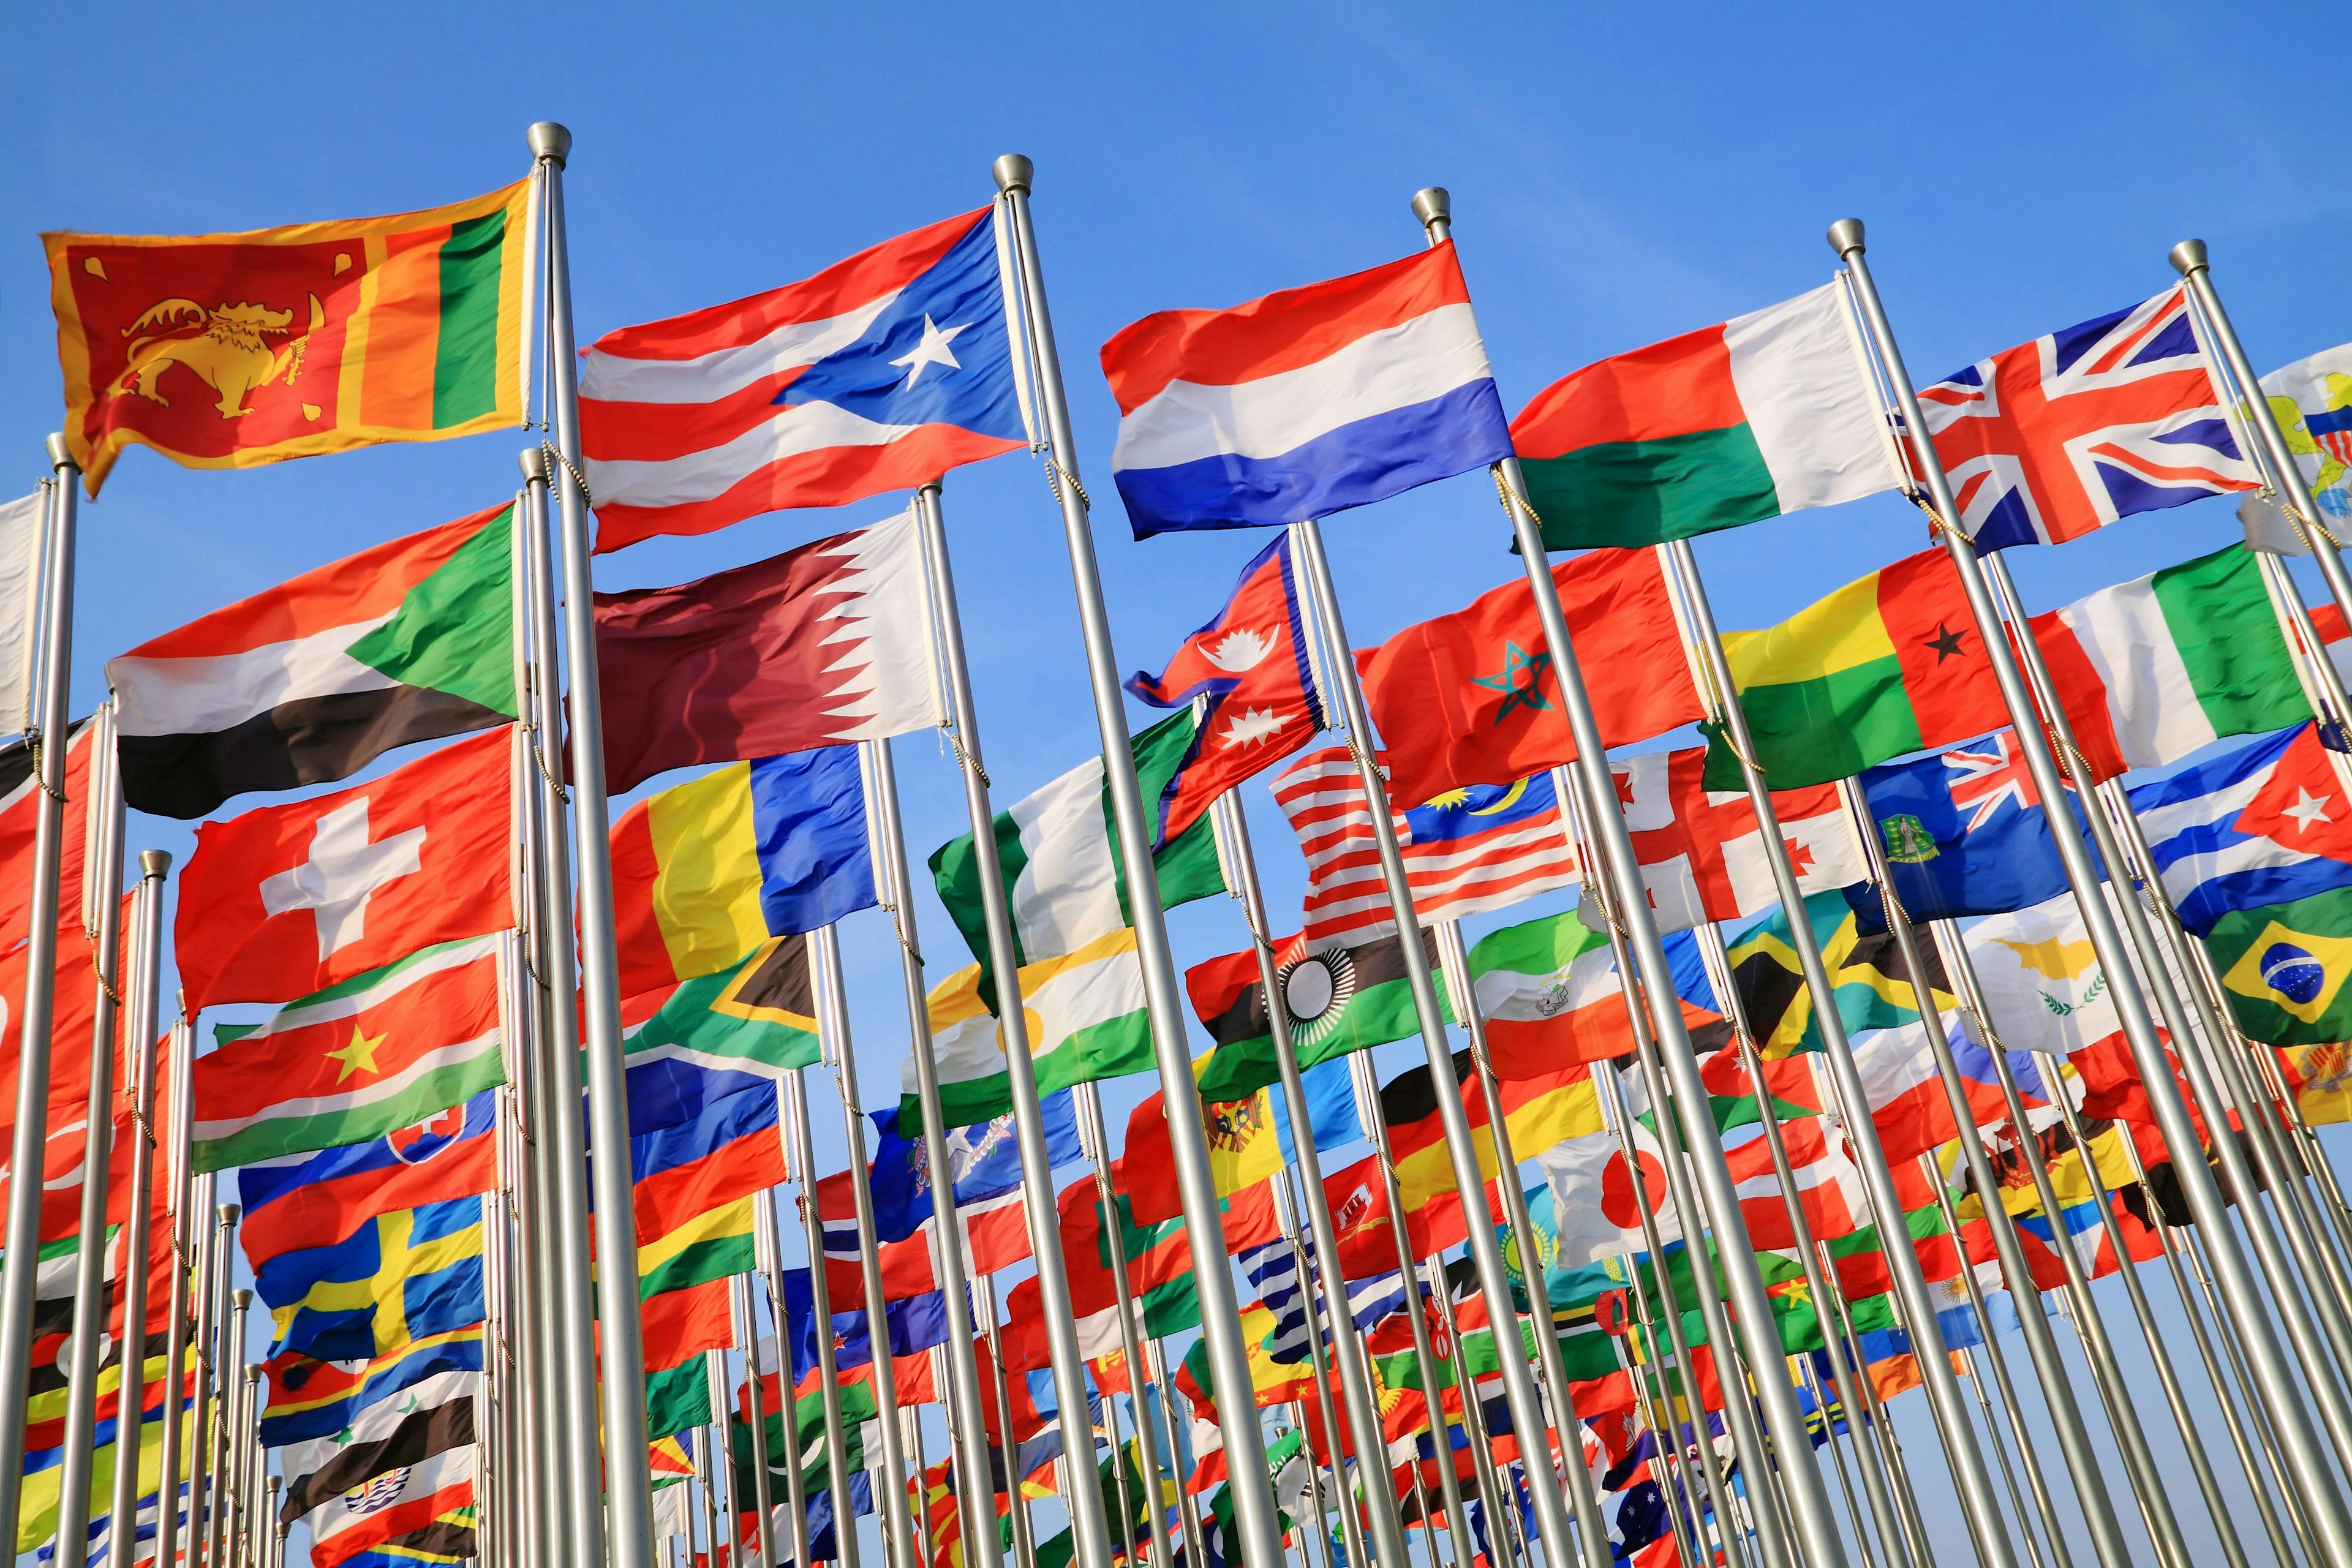 Flags from different nations blowing in the wind